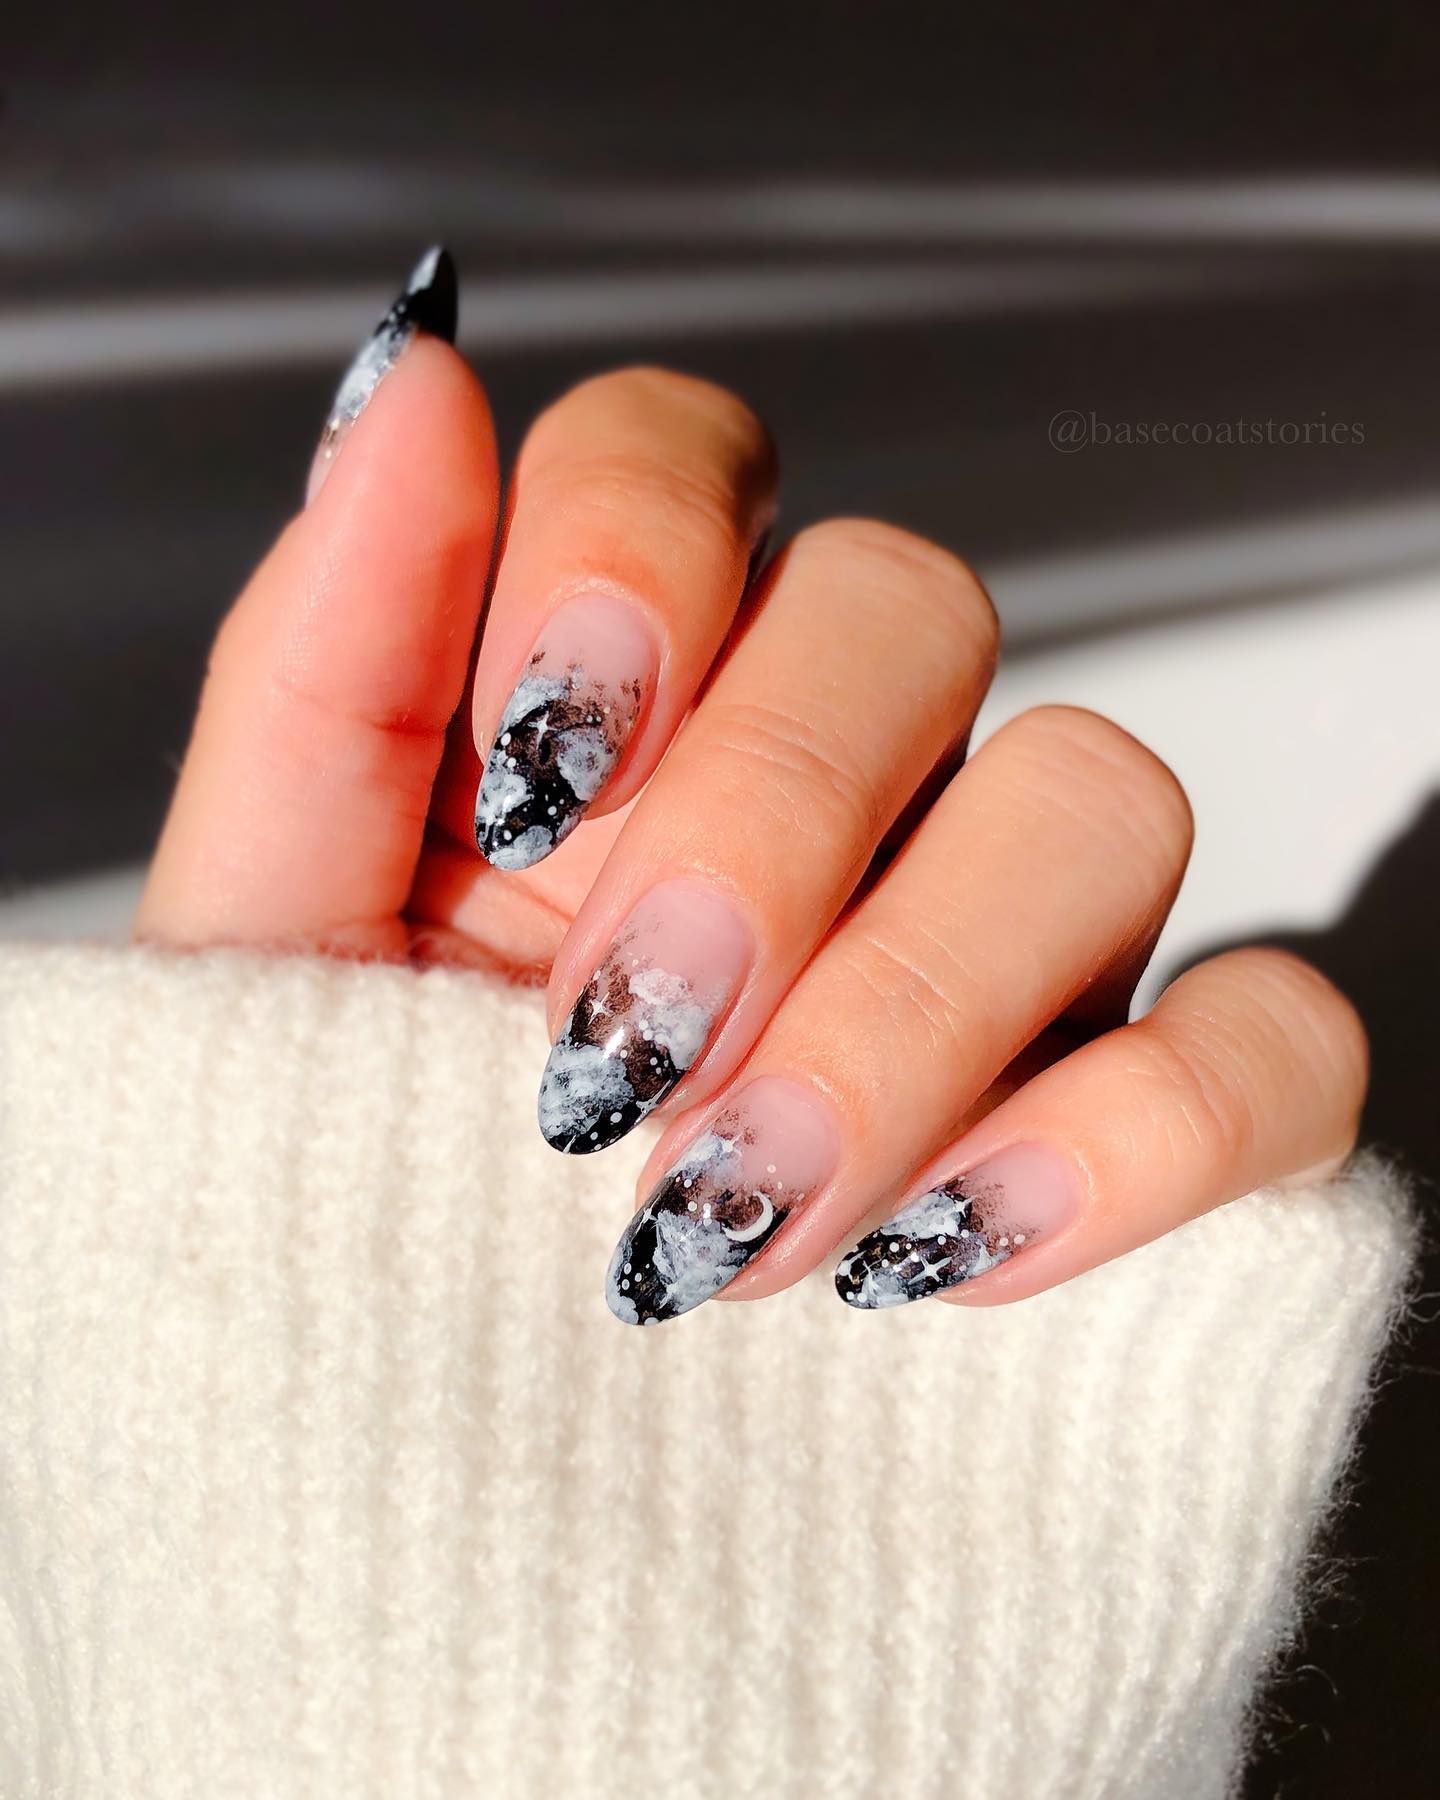 100+ Best Winter Nail Ideas And Designs To Try images 23